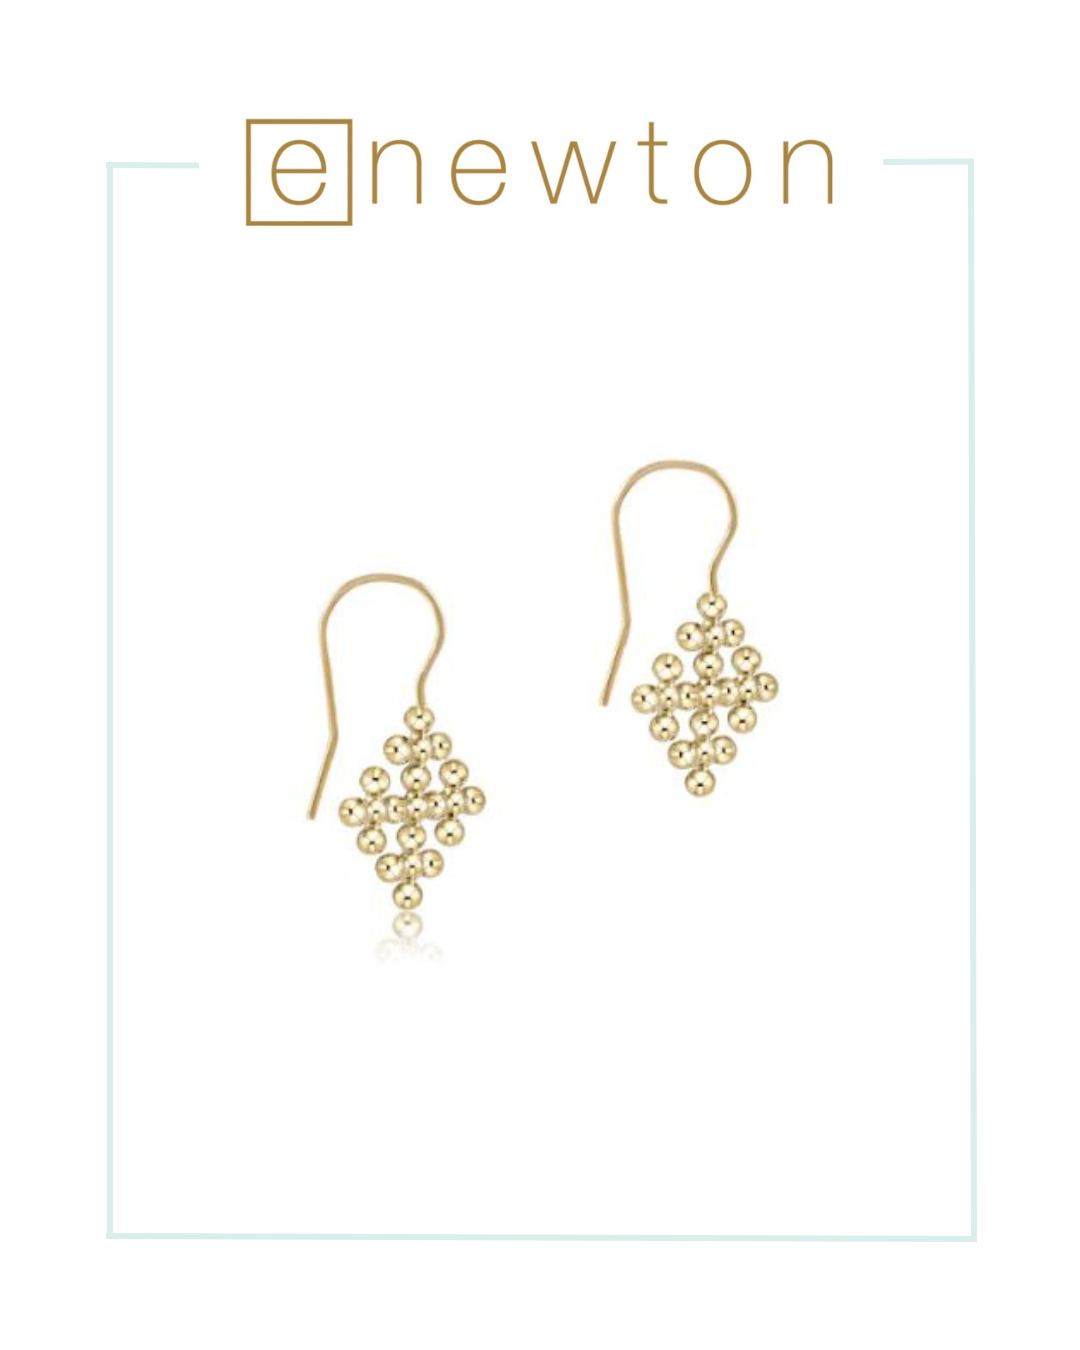 E Newton Classic Beaded Signature Cross Encompass Gold Drop-Earrings-ENEWTON-The Village Shoppe, Women’s Fashion Boutique, Shop Online and In Store - Located in Muscle Shoals, AL.